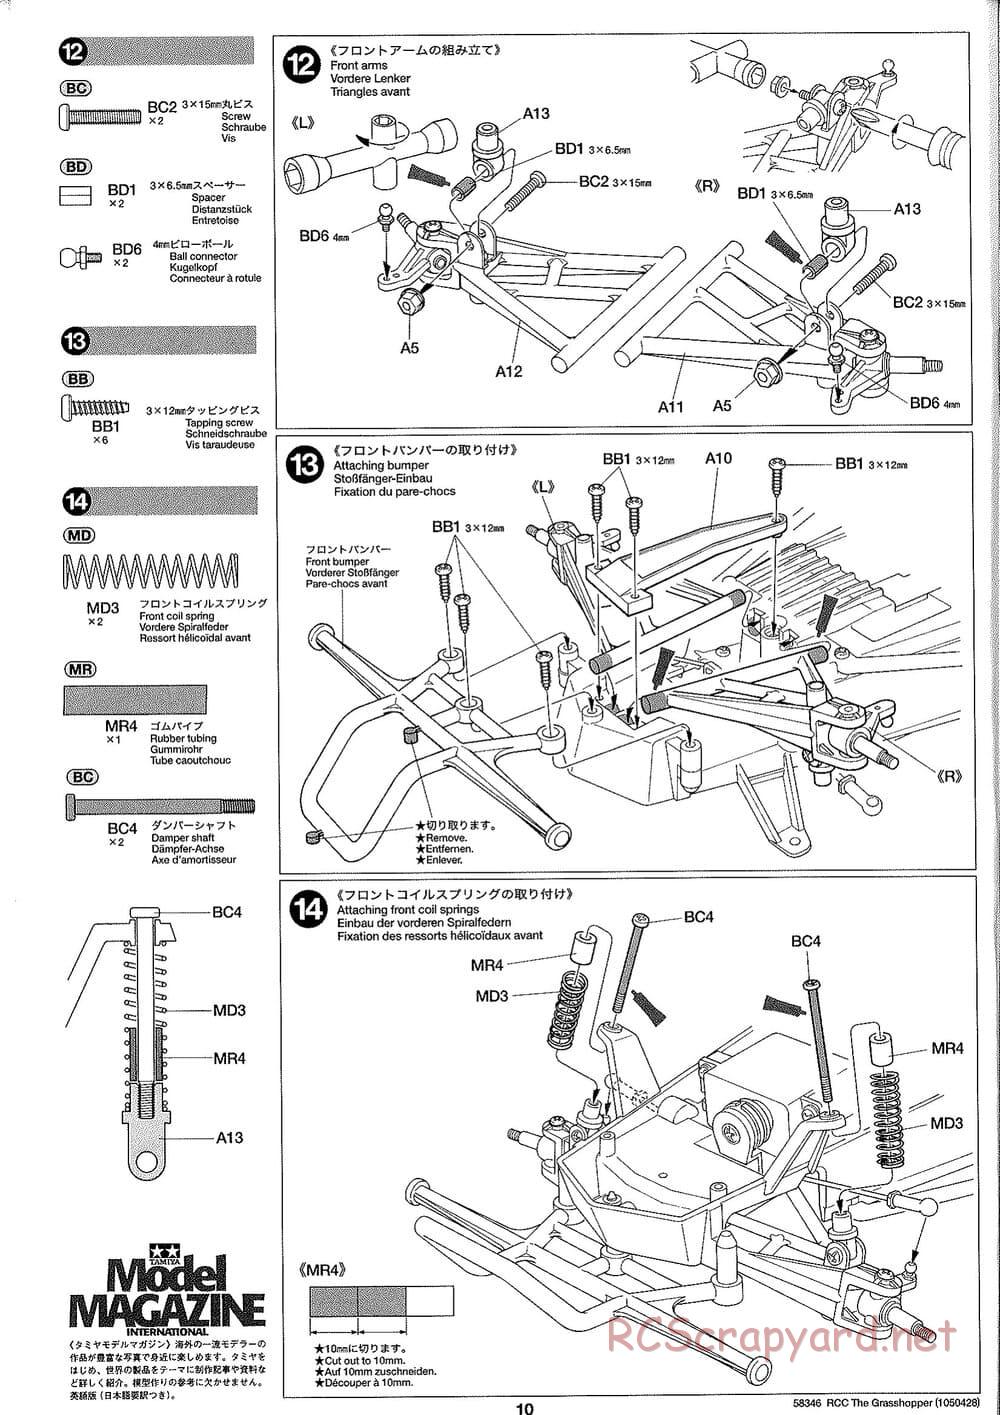 Tamiya - The Grasshopper (2005) - GH Chassis - Manual - Page 10